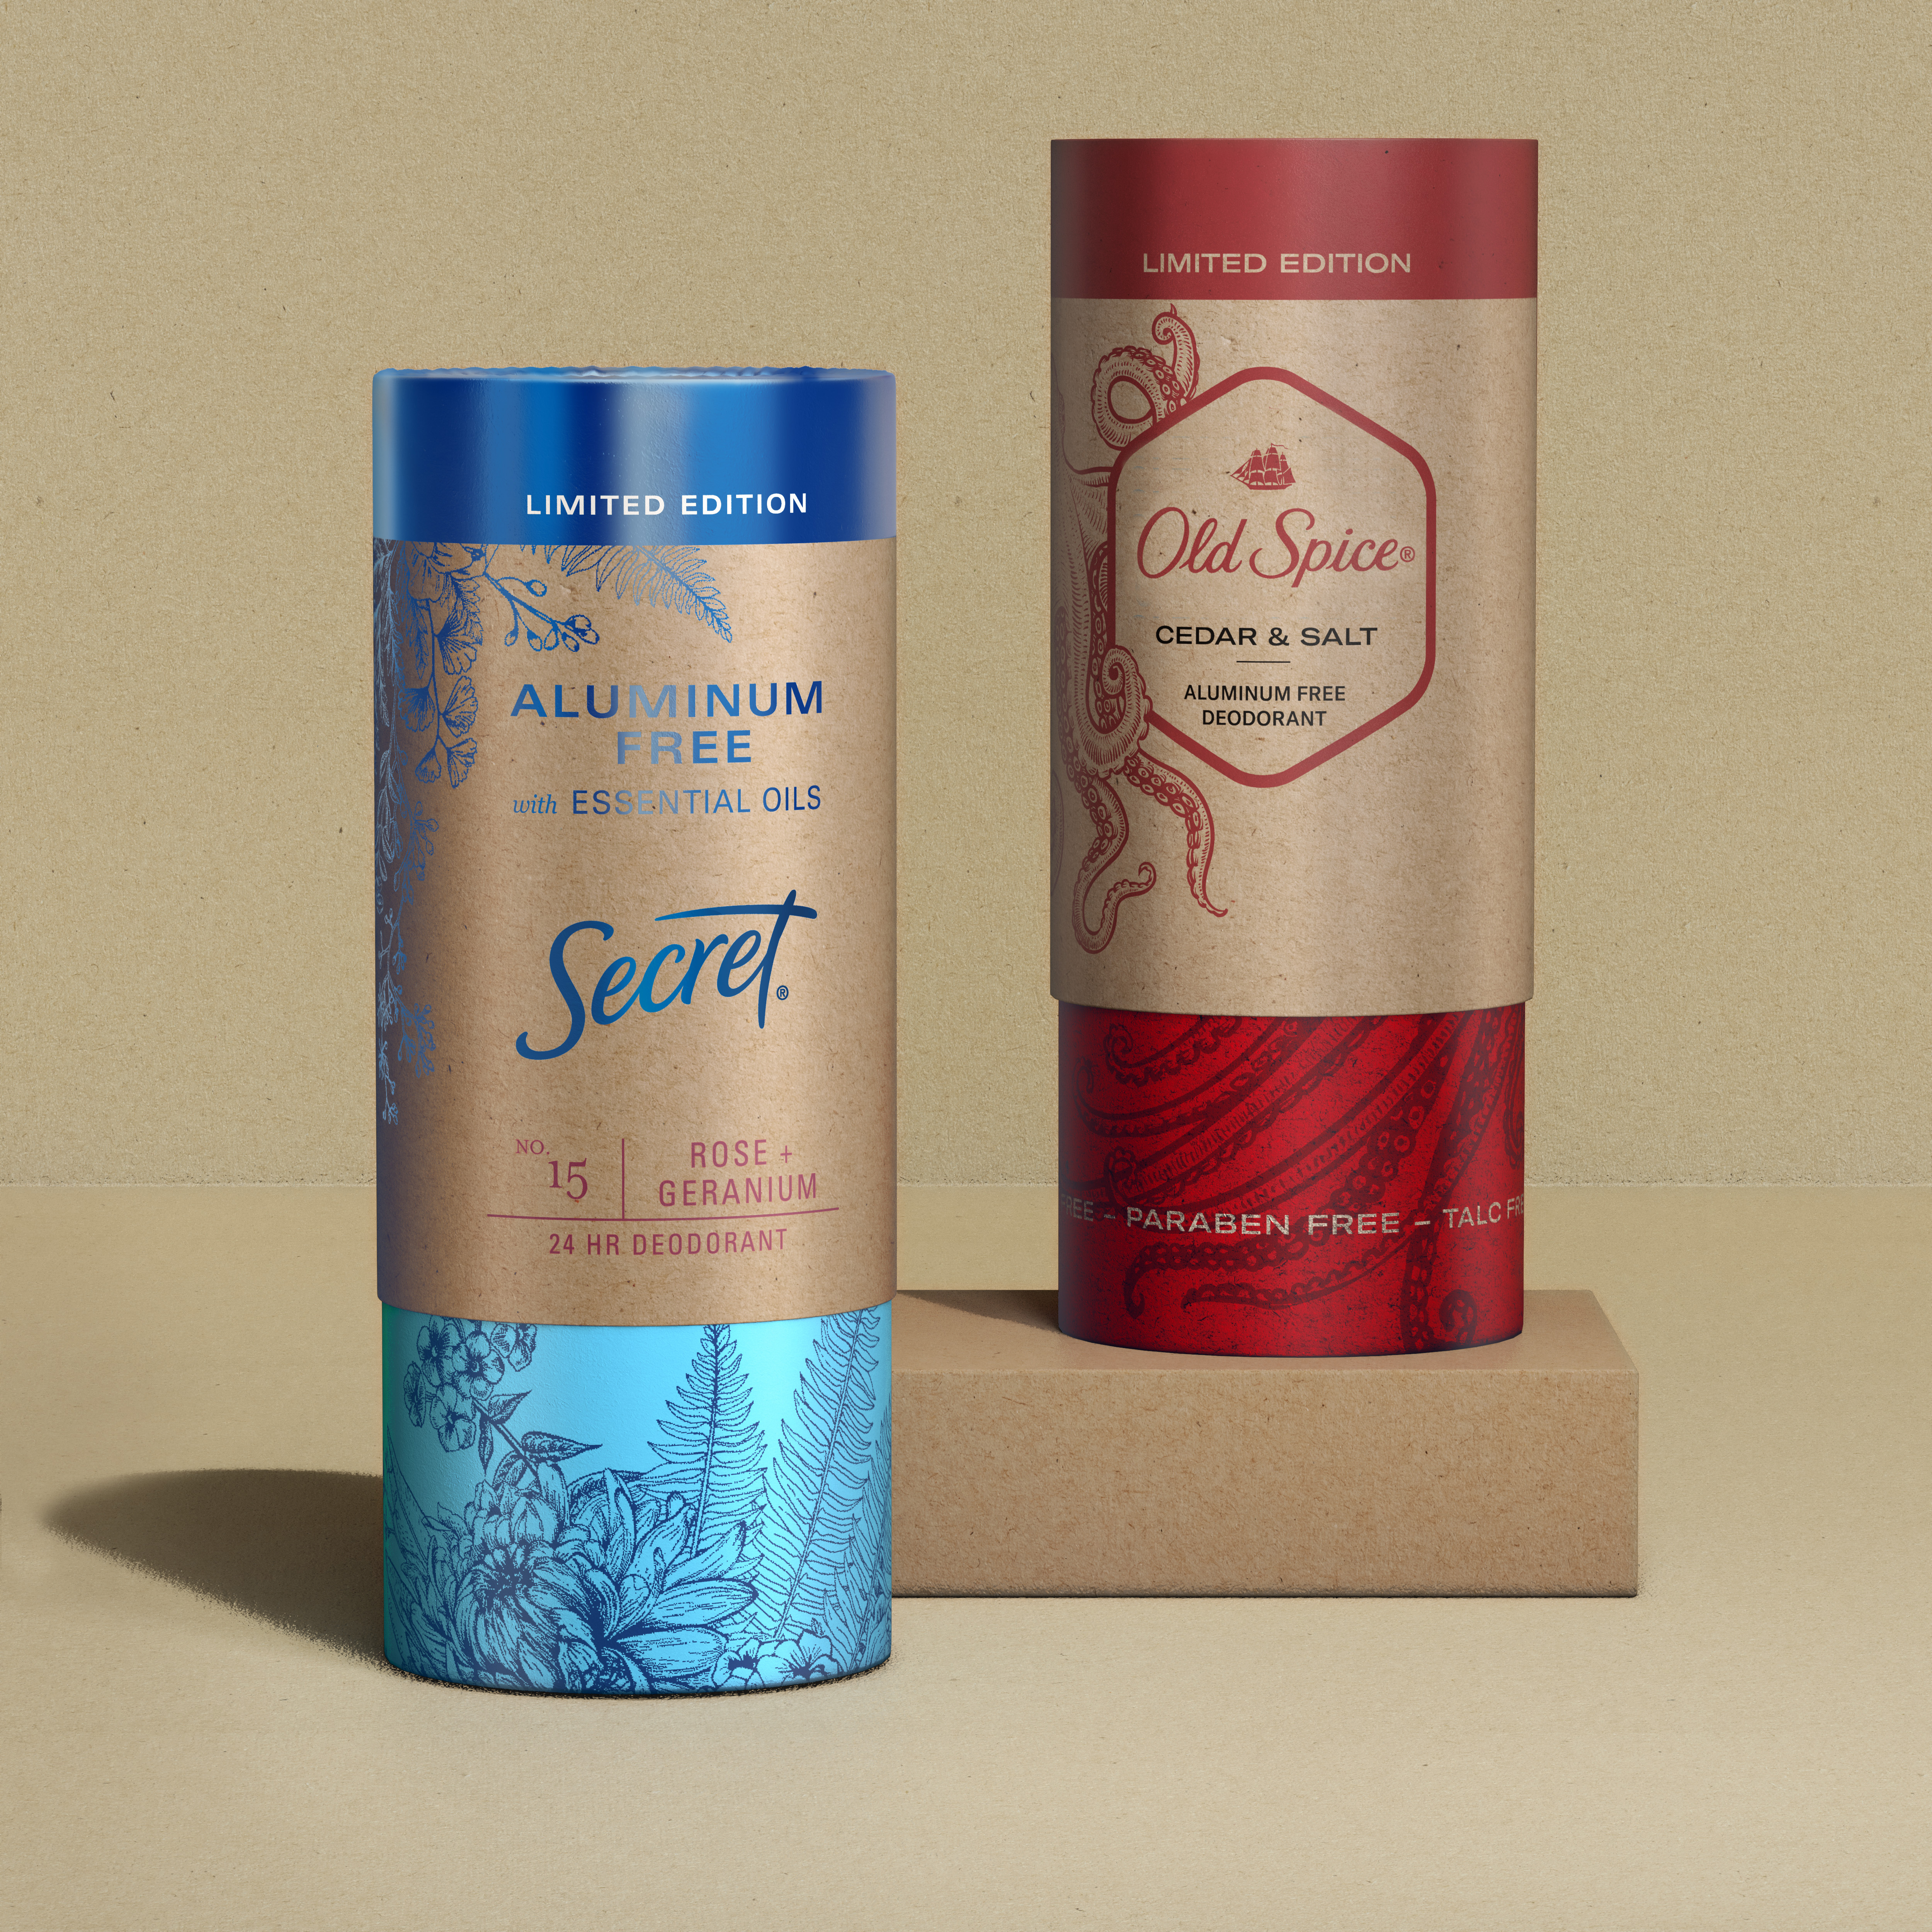 Packaging for Secret and Old Sprice Deodorants